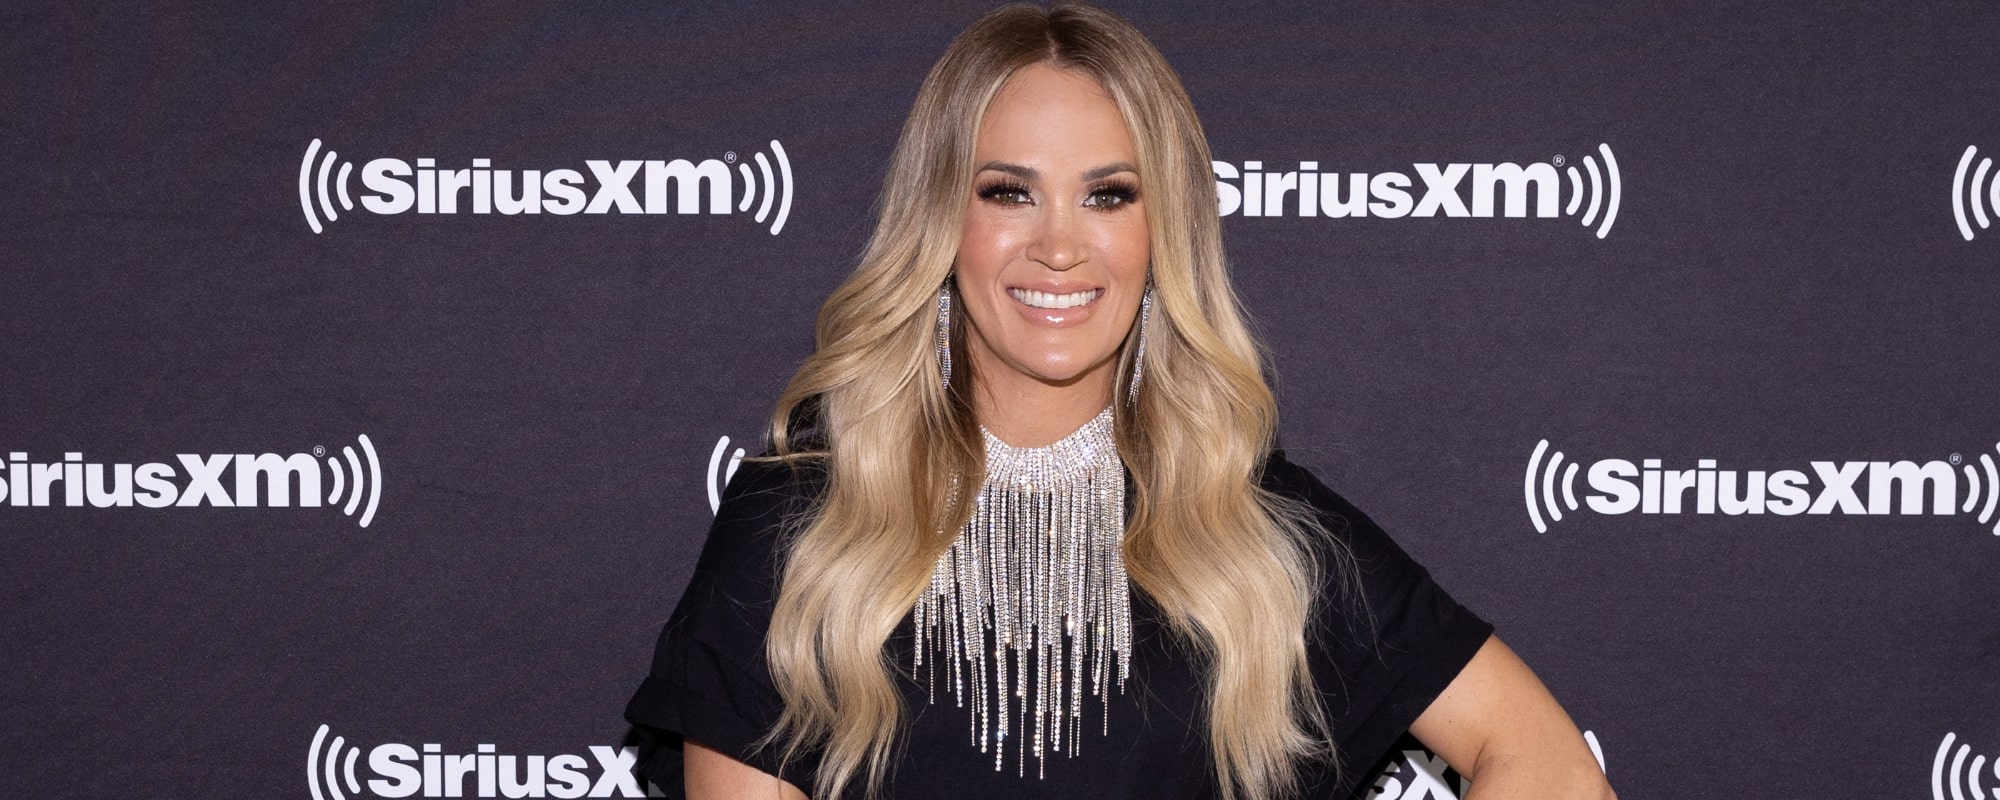 Carrie Underwood Celebrates Son Jacob's Fifth Birthday With Family Ice  Hockey Game on Frozen Pond - American Songwriter